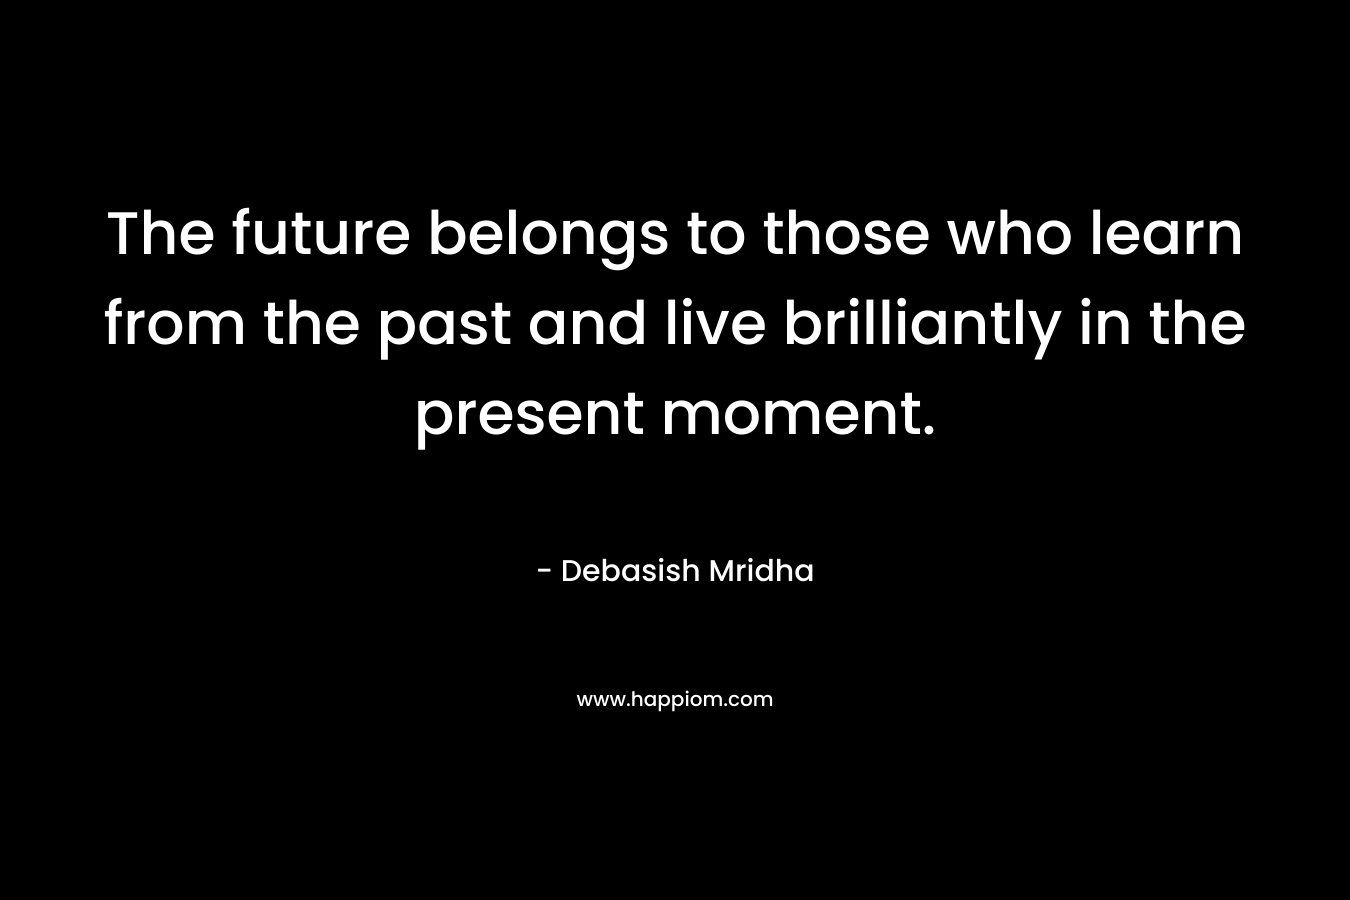 The future belongs to those who learn from the past and live brilliantly in the present moment.